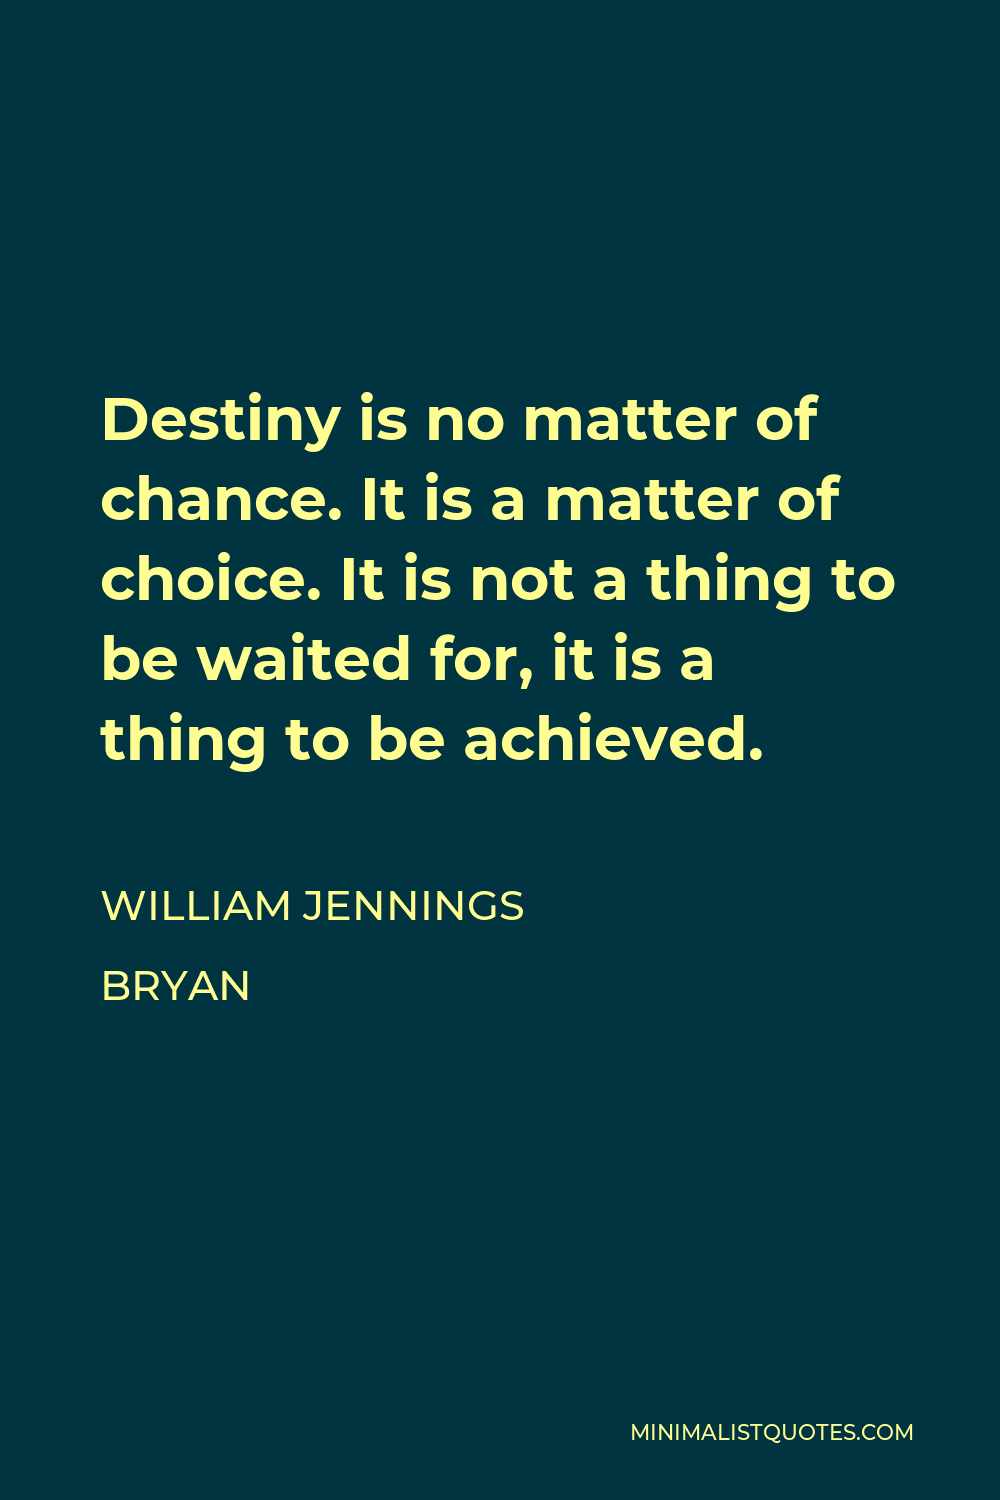 William Jennings Bryan Quote - Destiny is no matter of chance. It is a matter of choice. It is not a thing to be waited for, it is a thing to be achieved.